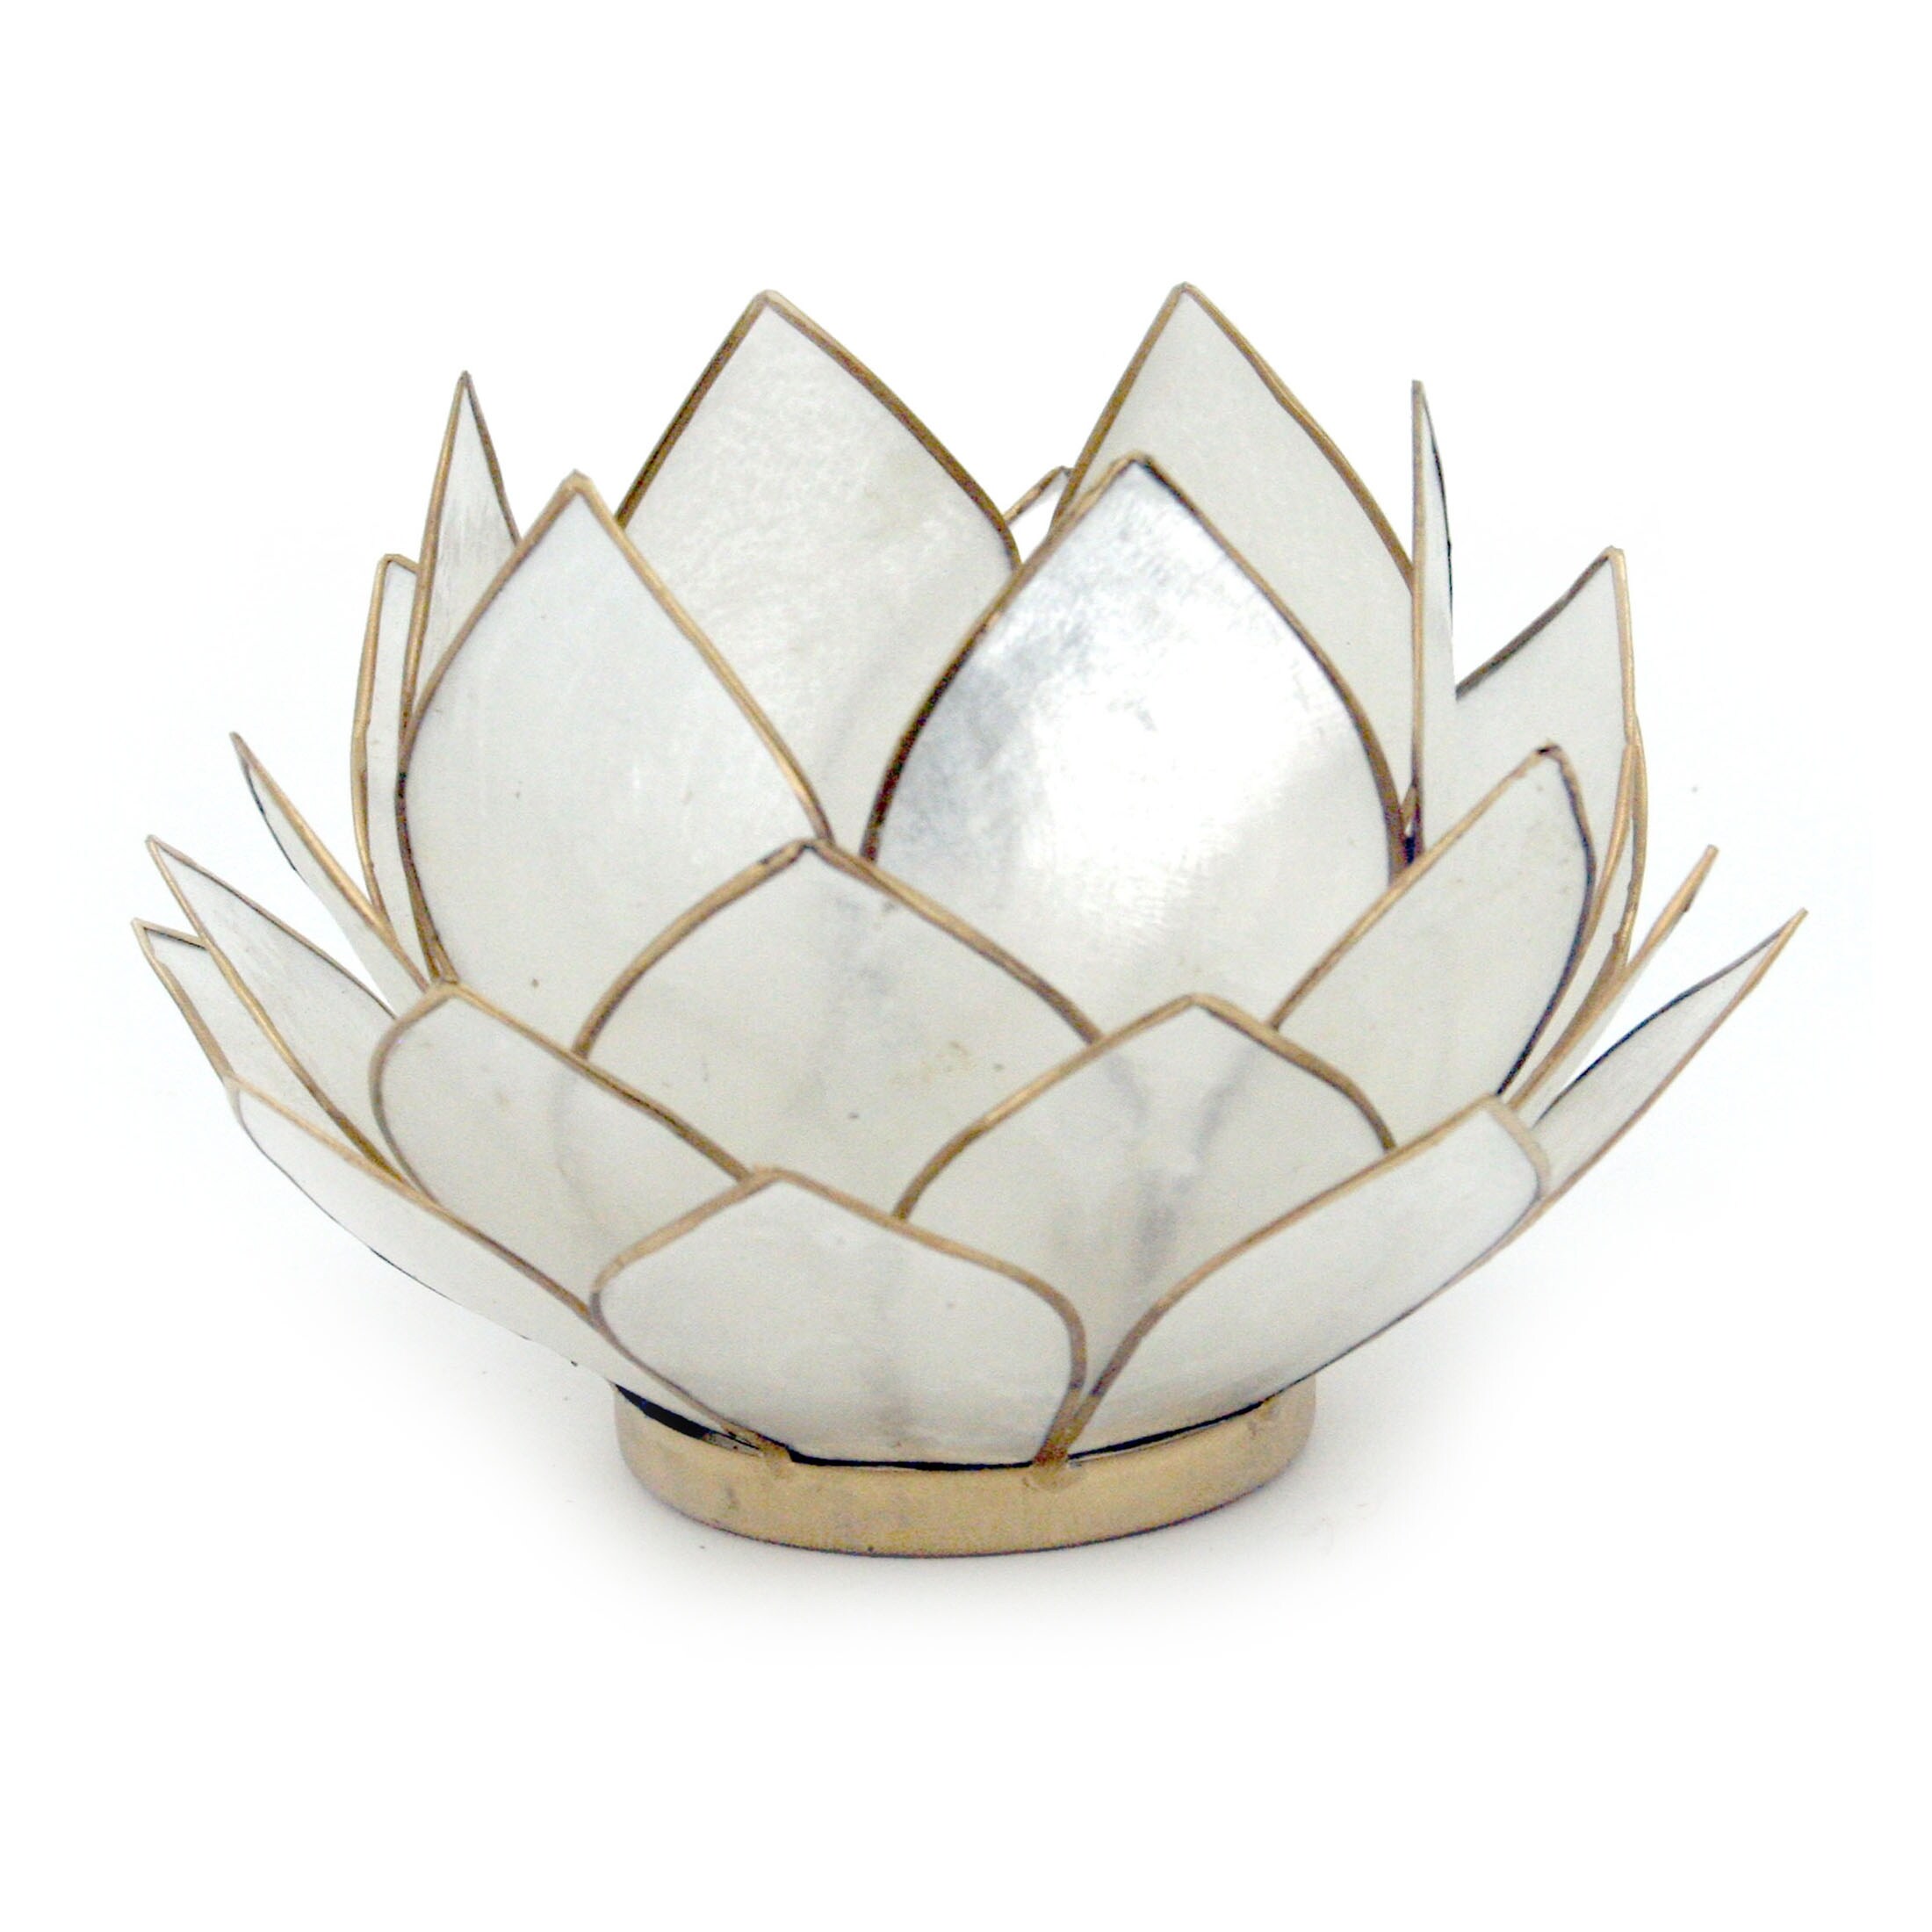 Natural White Capiz Shell Opening Lotus Flower Bulb Tealight Candle - 3.25 X 5 X 5 inches